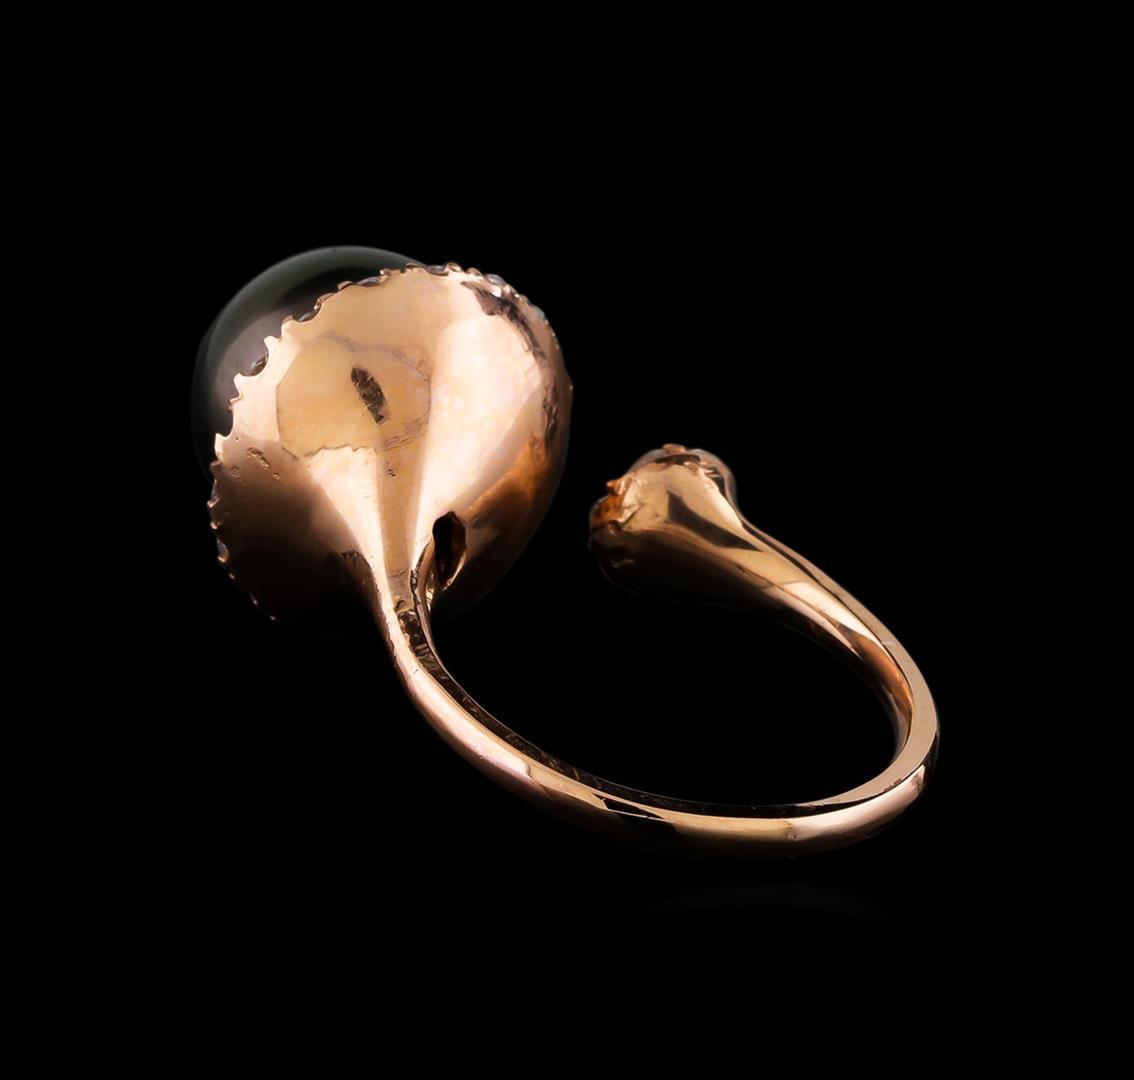 0.66 ctw Diamond and Pearl Ring - 14KT Rose Gold